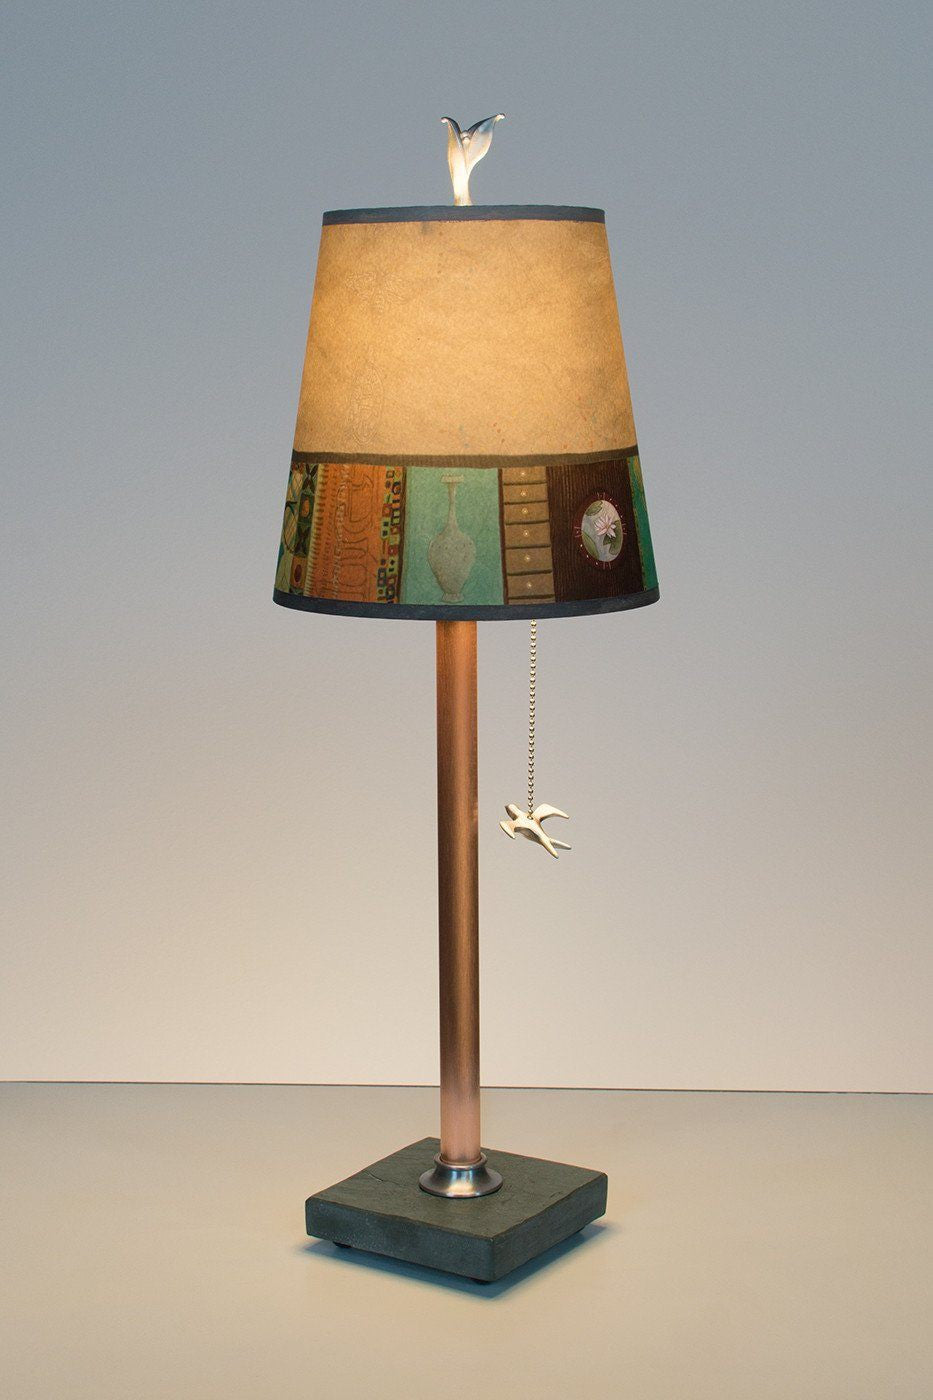 Copper Table Lamp on Vermont Slate Base with Small Drum Shade in Linen Match Lit